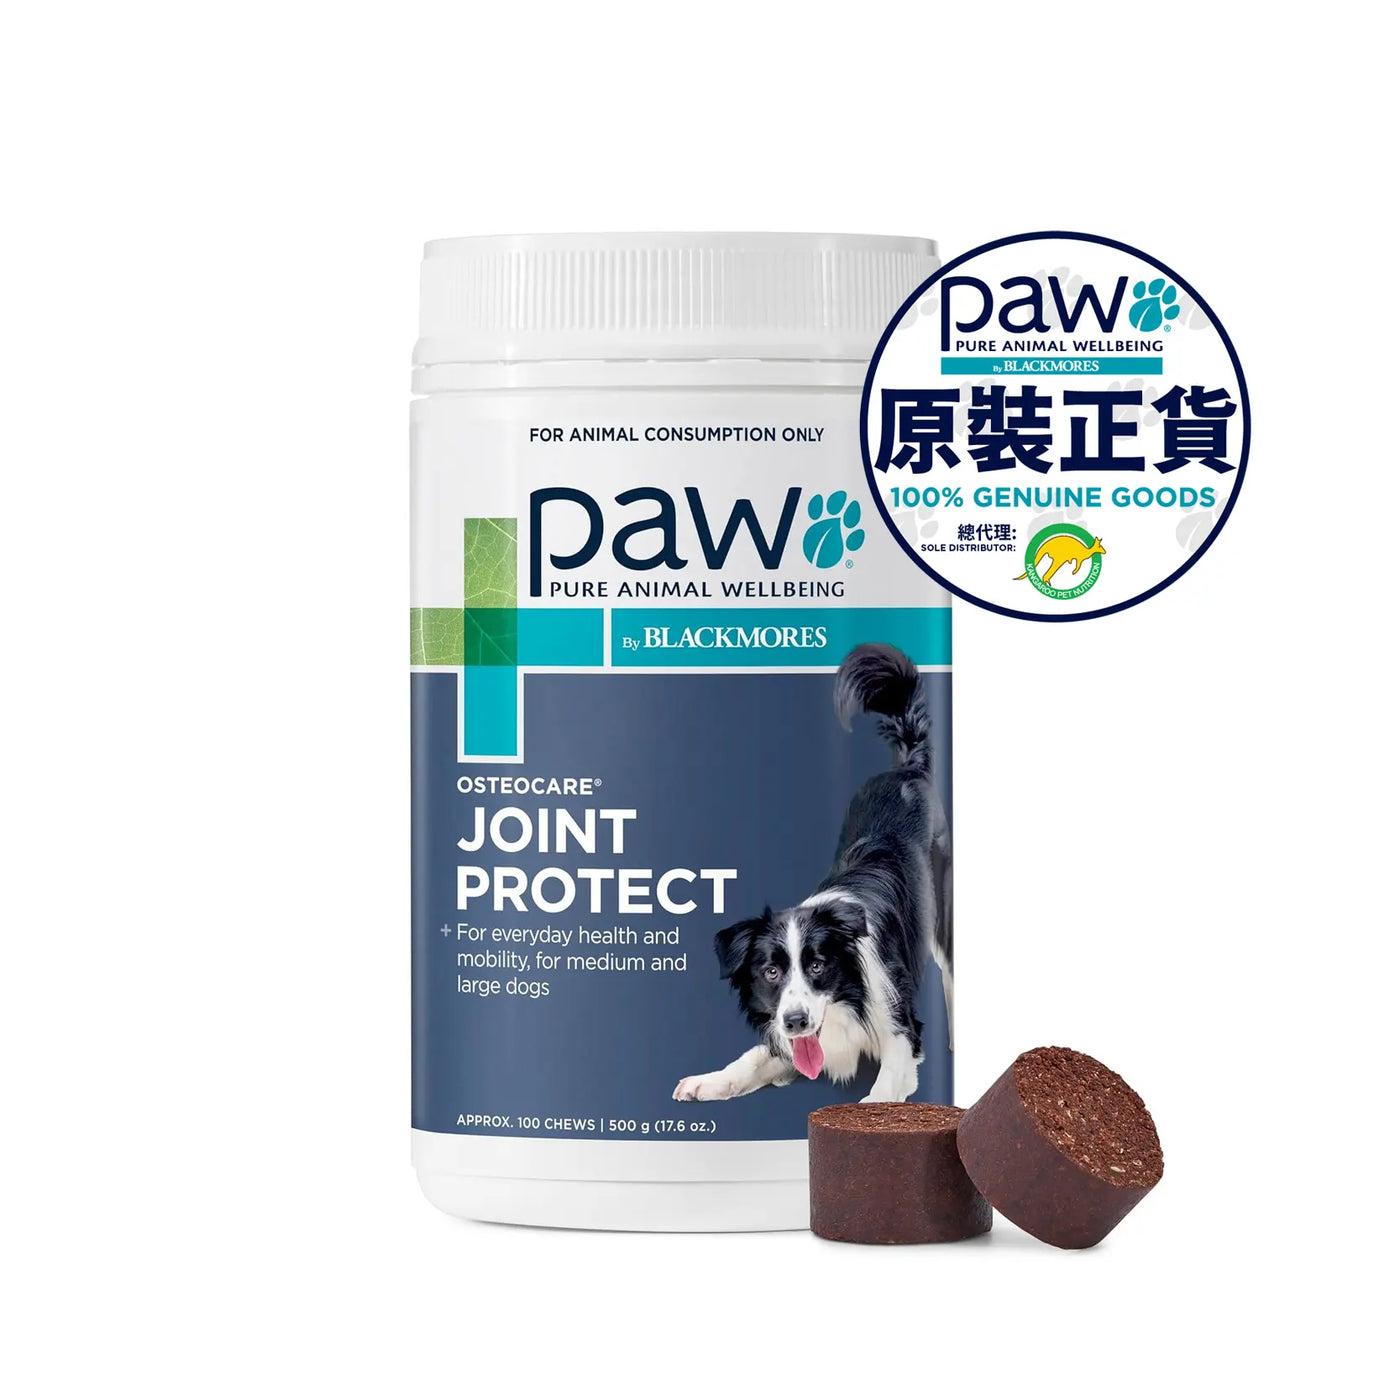 PAW - Osteocare Chews (Joint Supplement For Dogs) 500g - 100 Chews